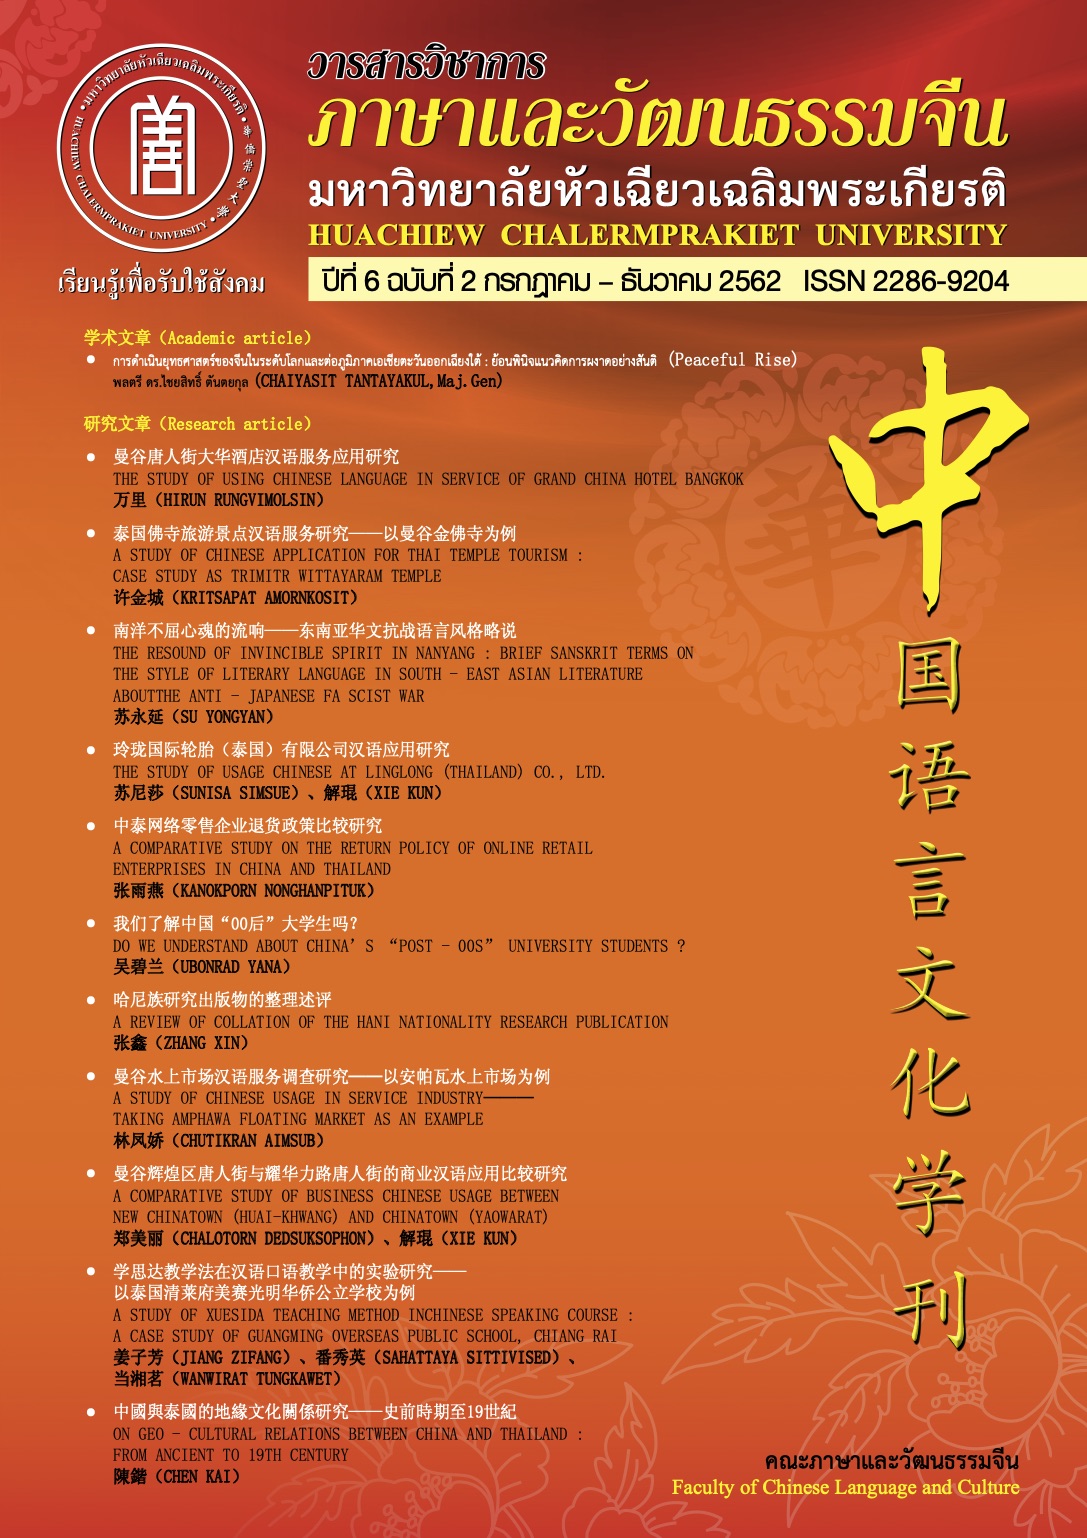 					View Vol. 6 No. 2 (2019): Faculty of Chinese Language and Culture
				